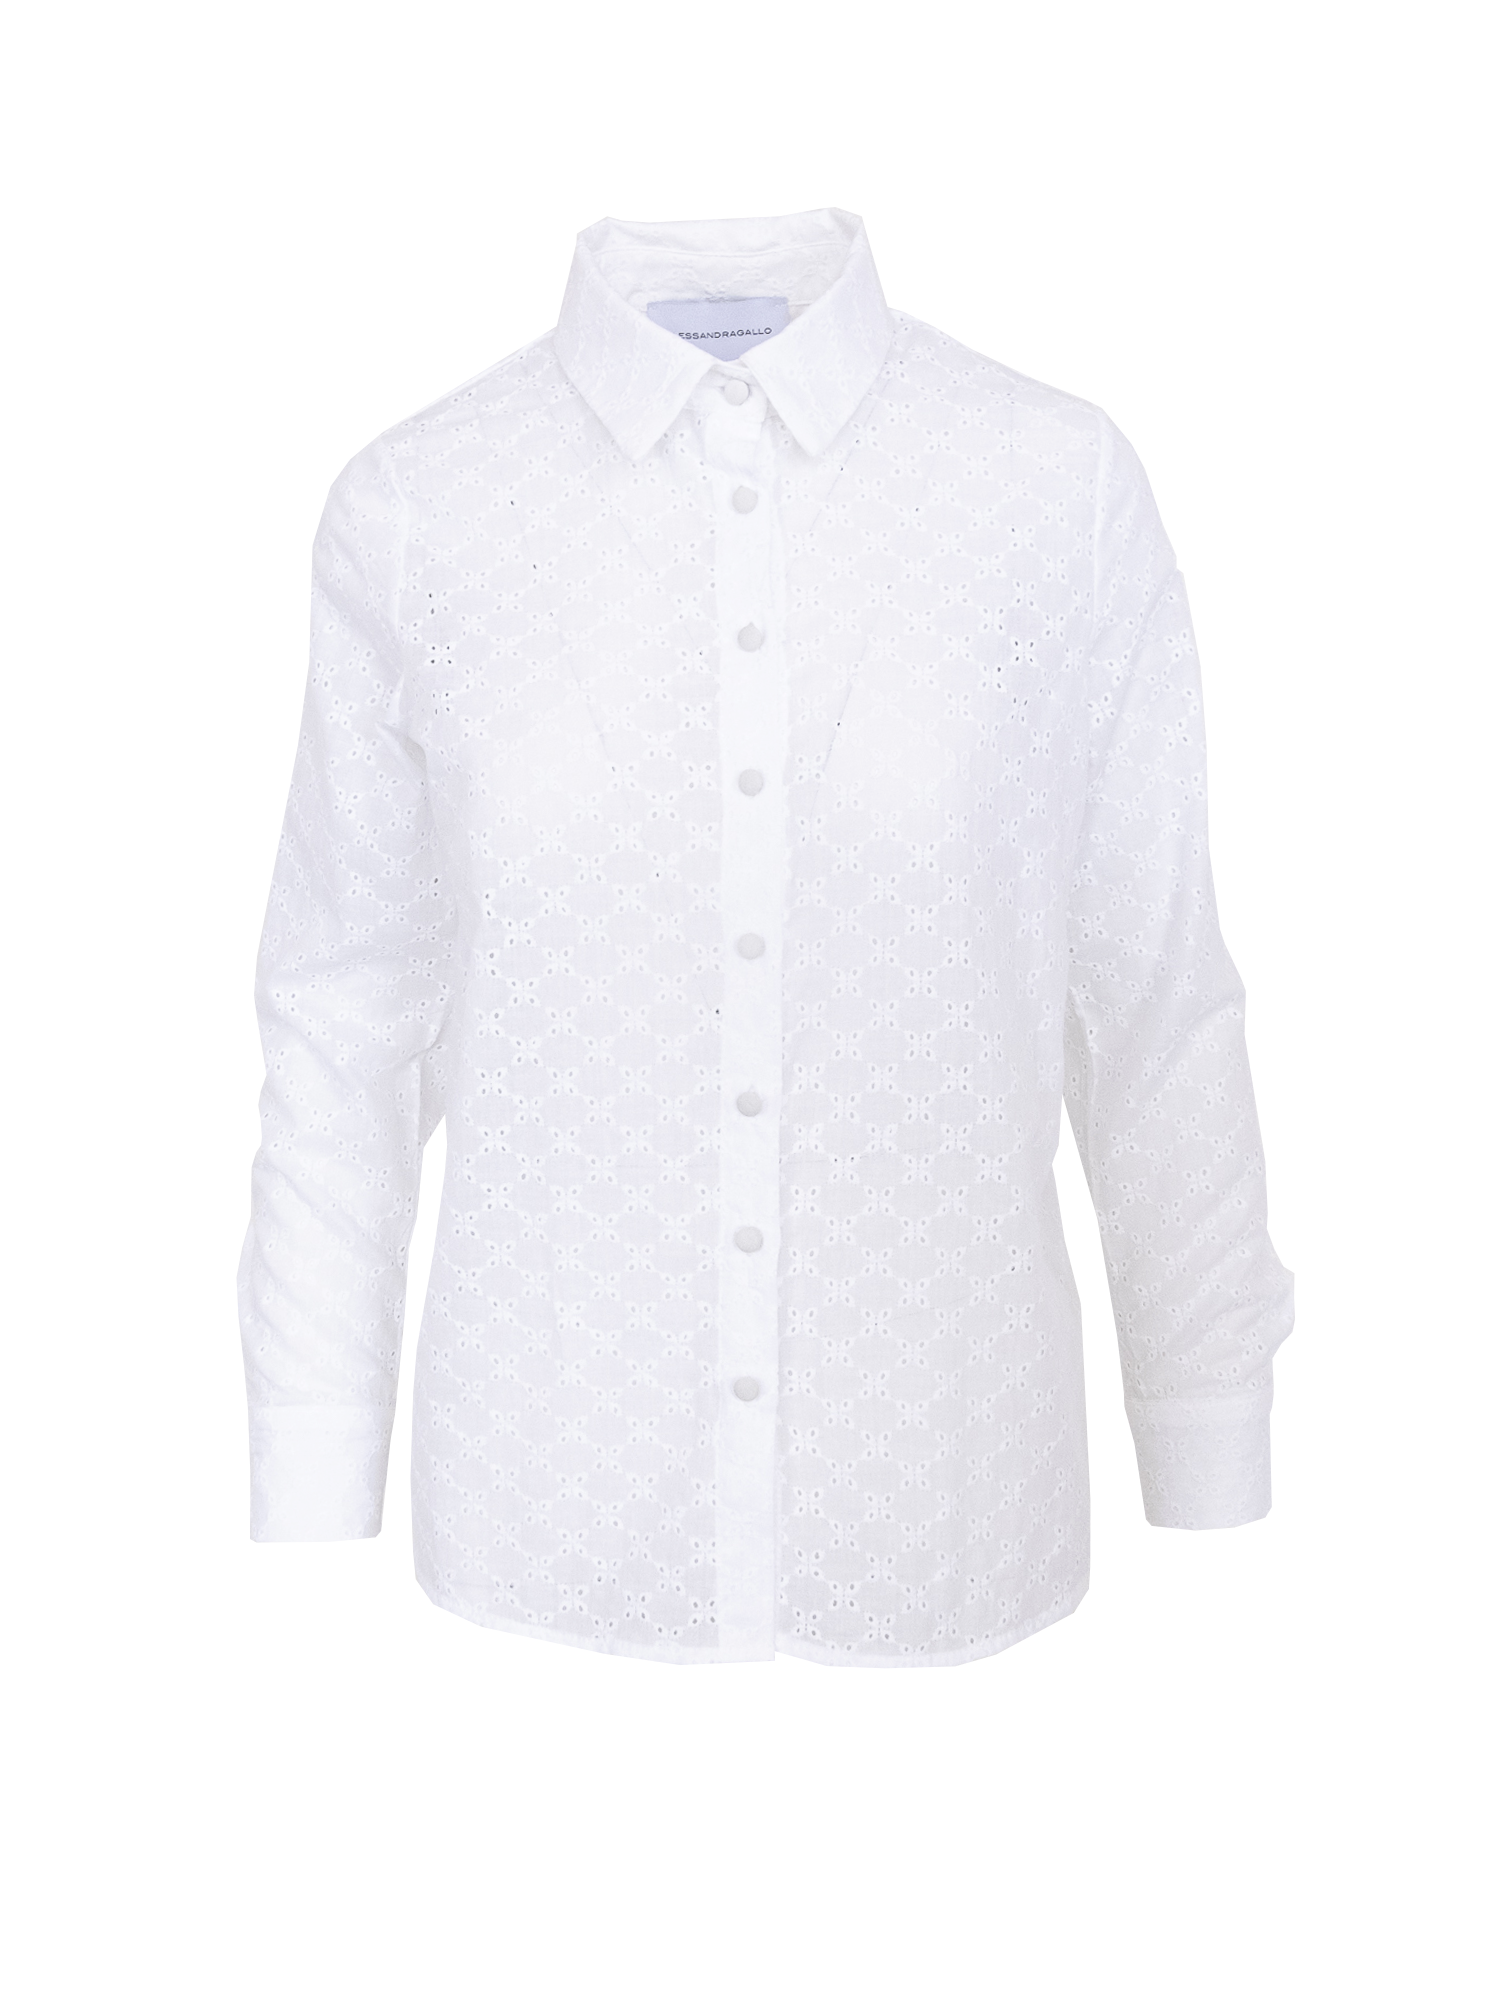 PEONIA - blouse in cotton broderie anglaise